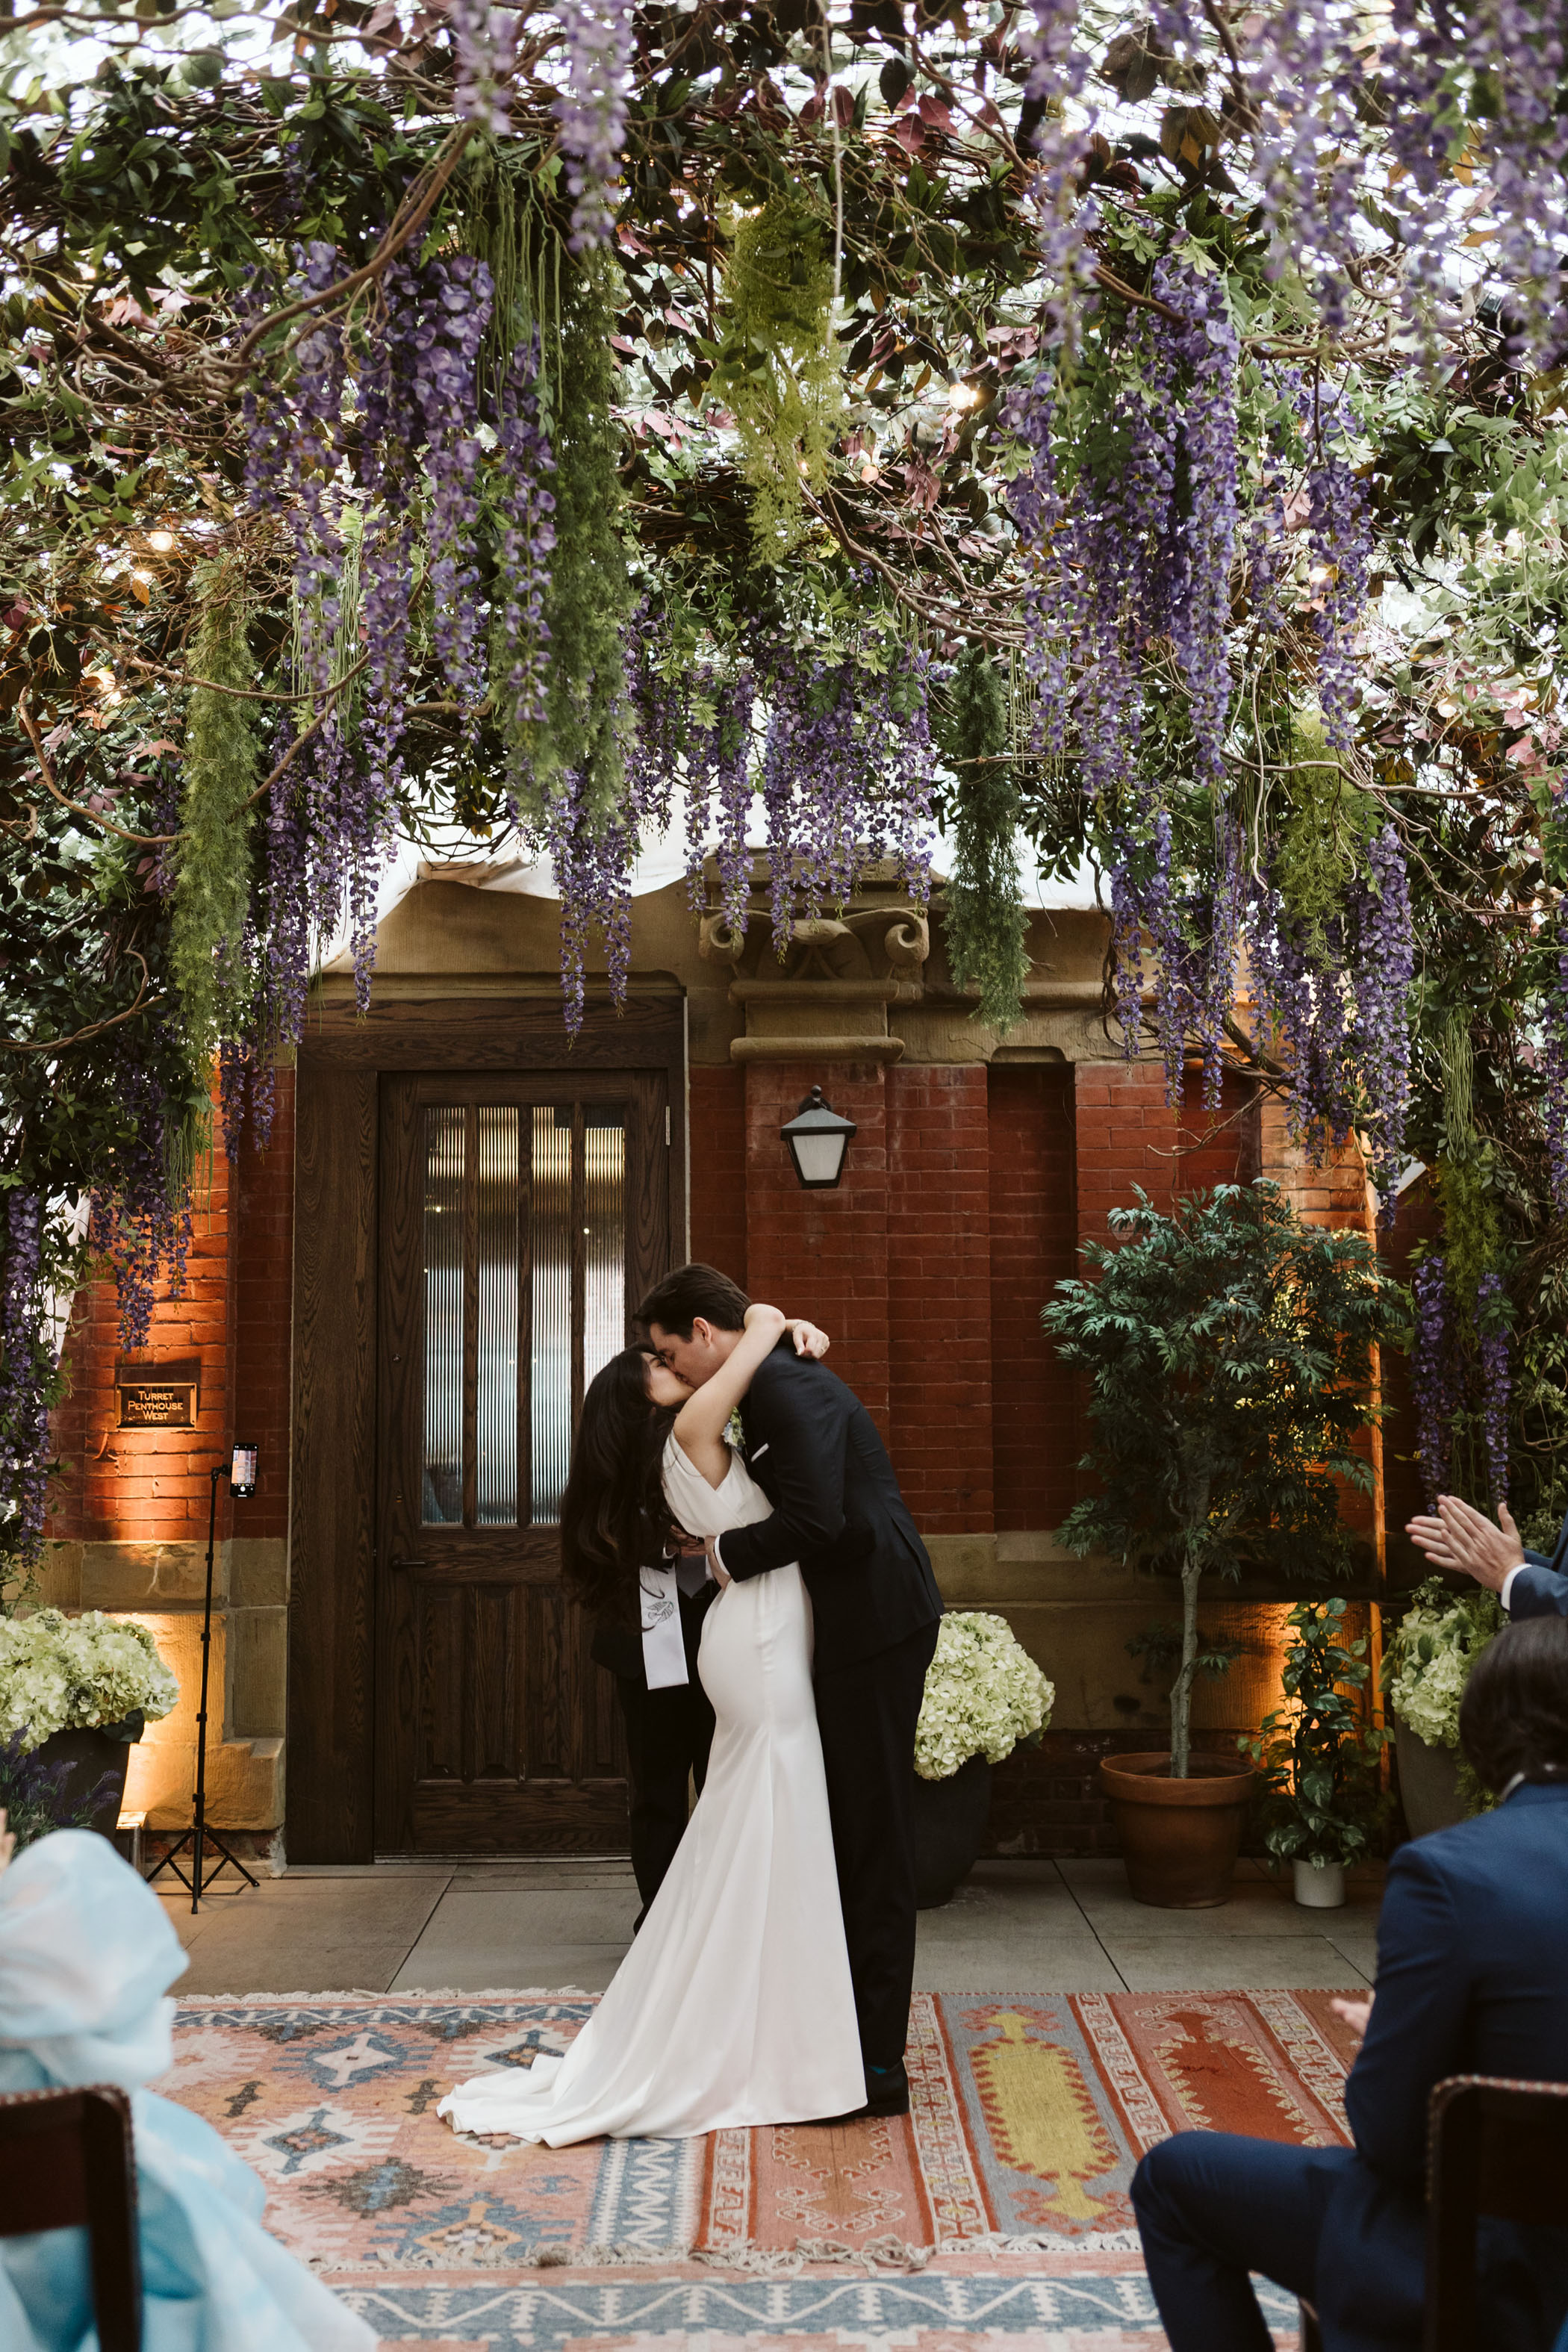 Bride and groom kissing in New York Micro wedding